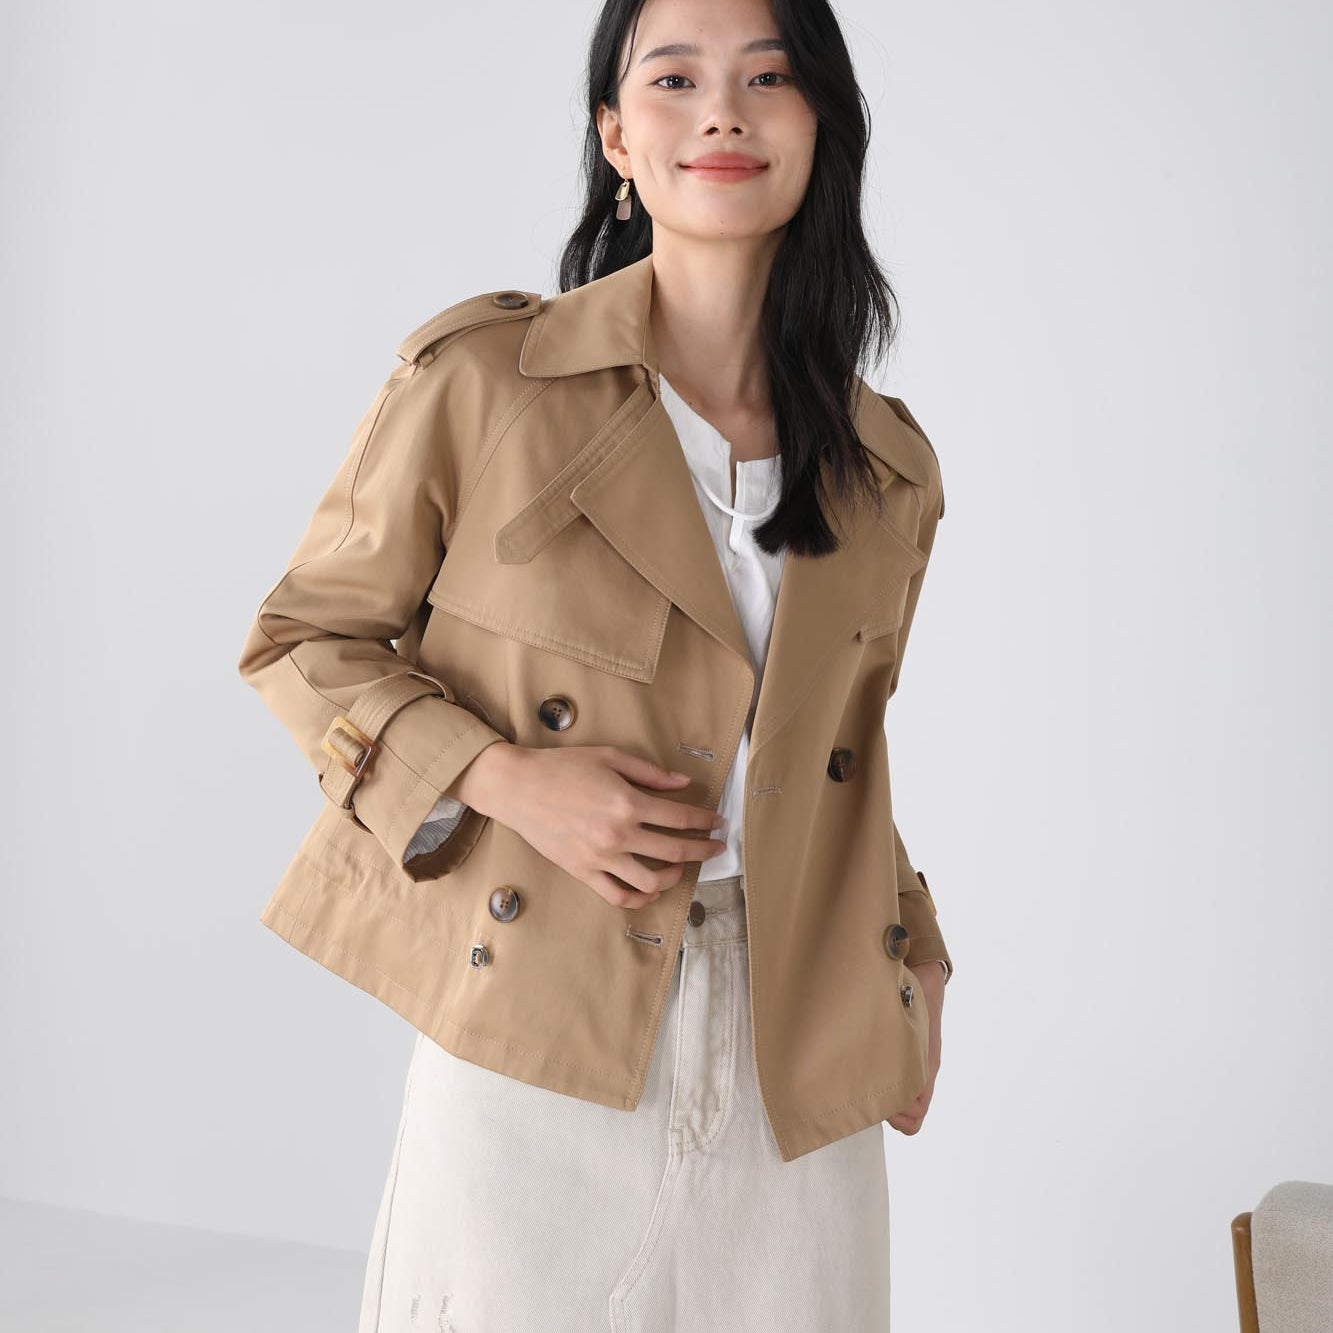 Evie cropped tan trench coat